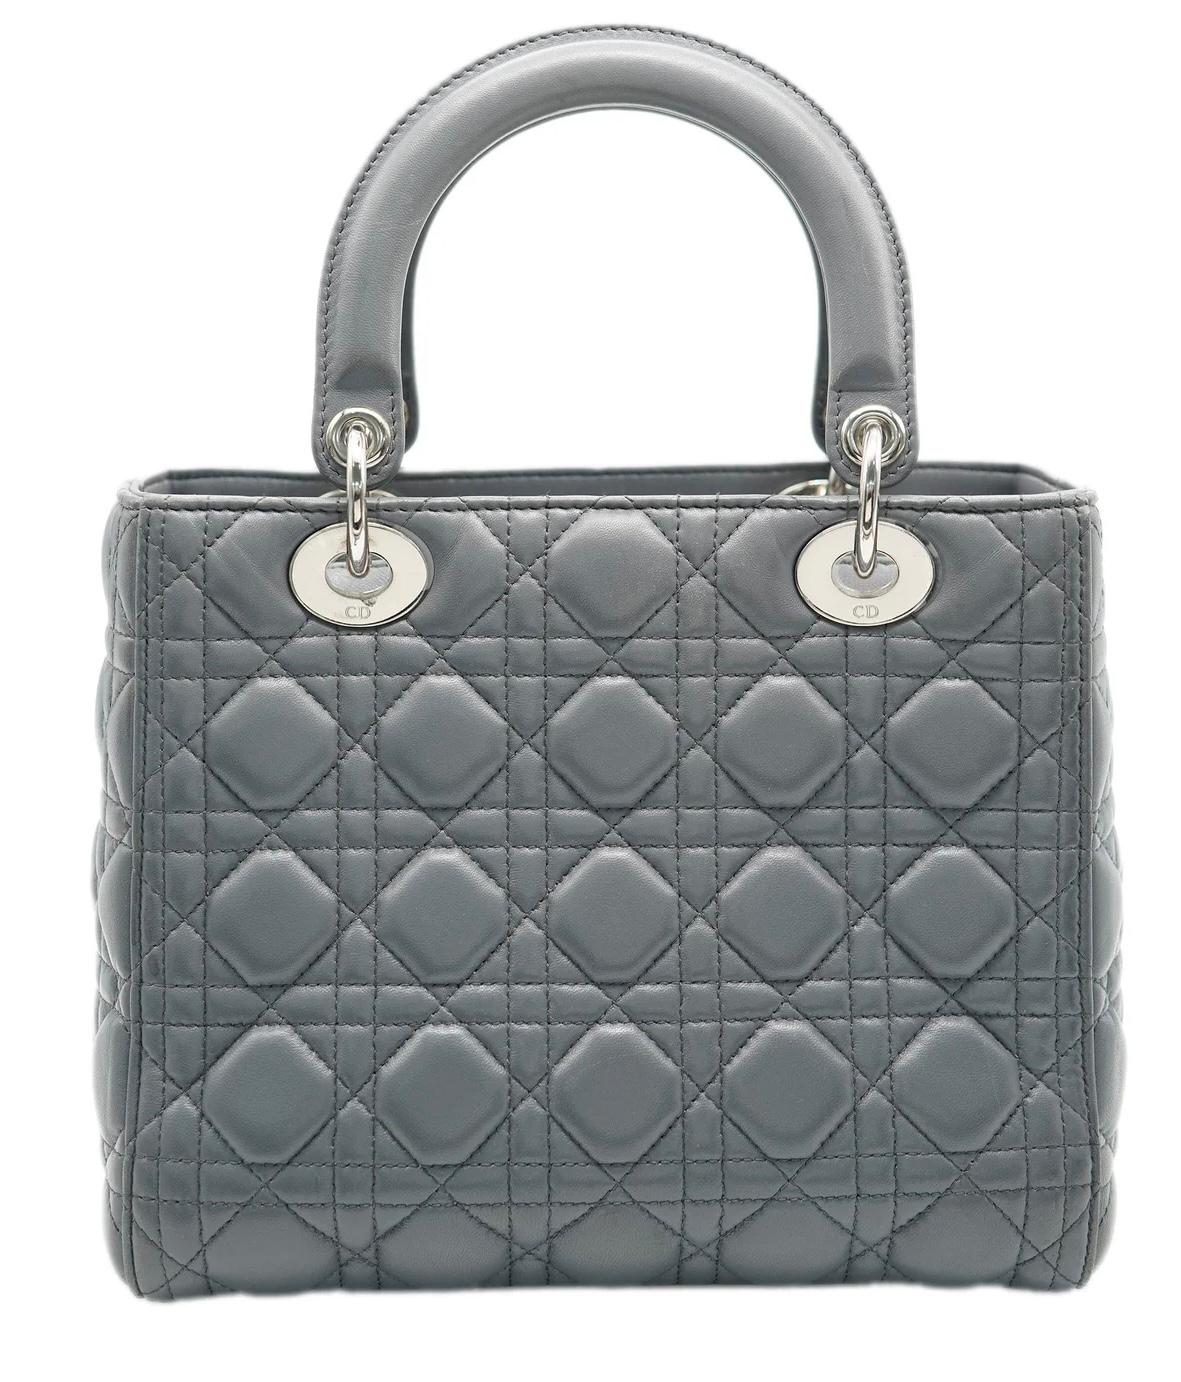 Lady dior medium Grey Bag In Excellent Condition For Sale In London, England